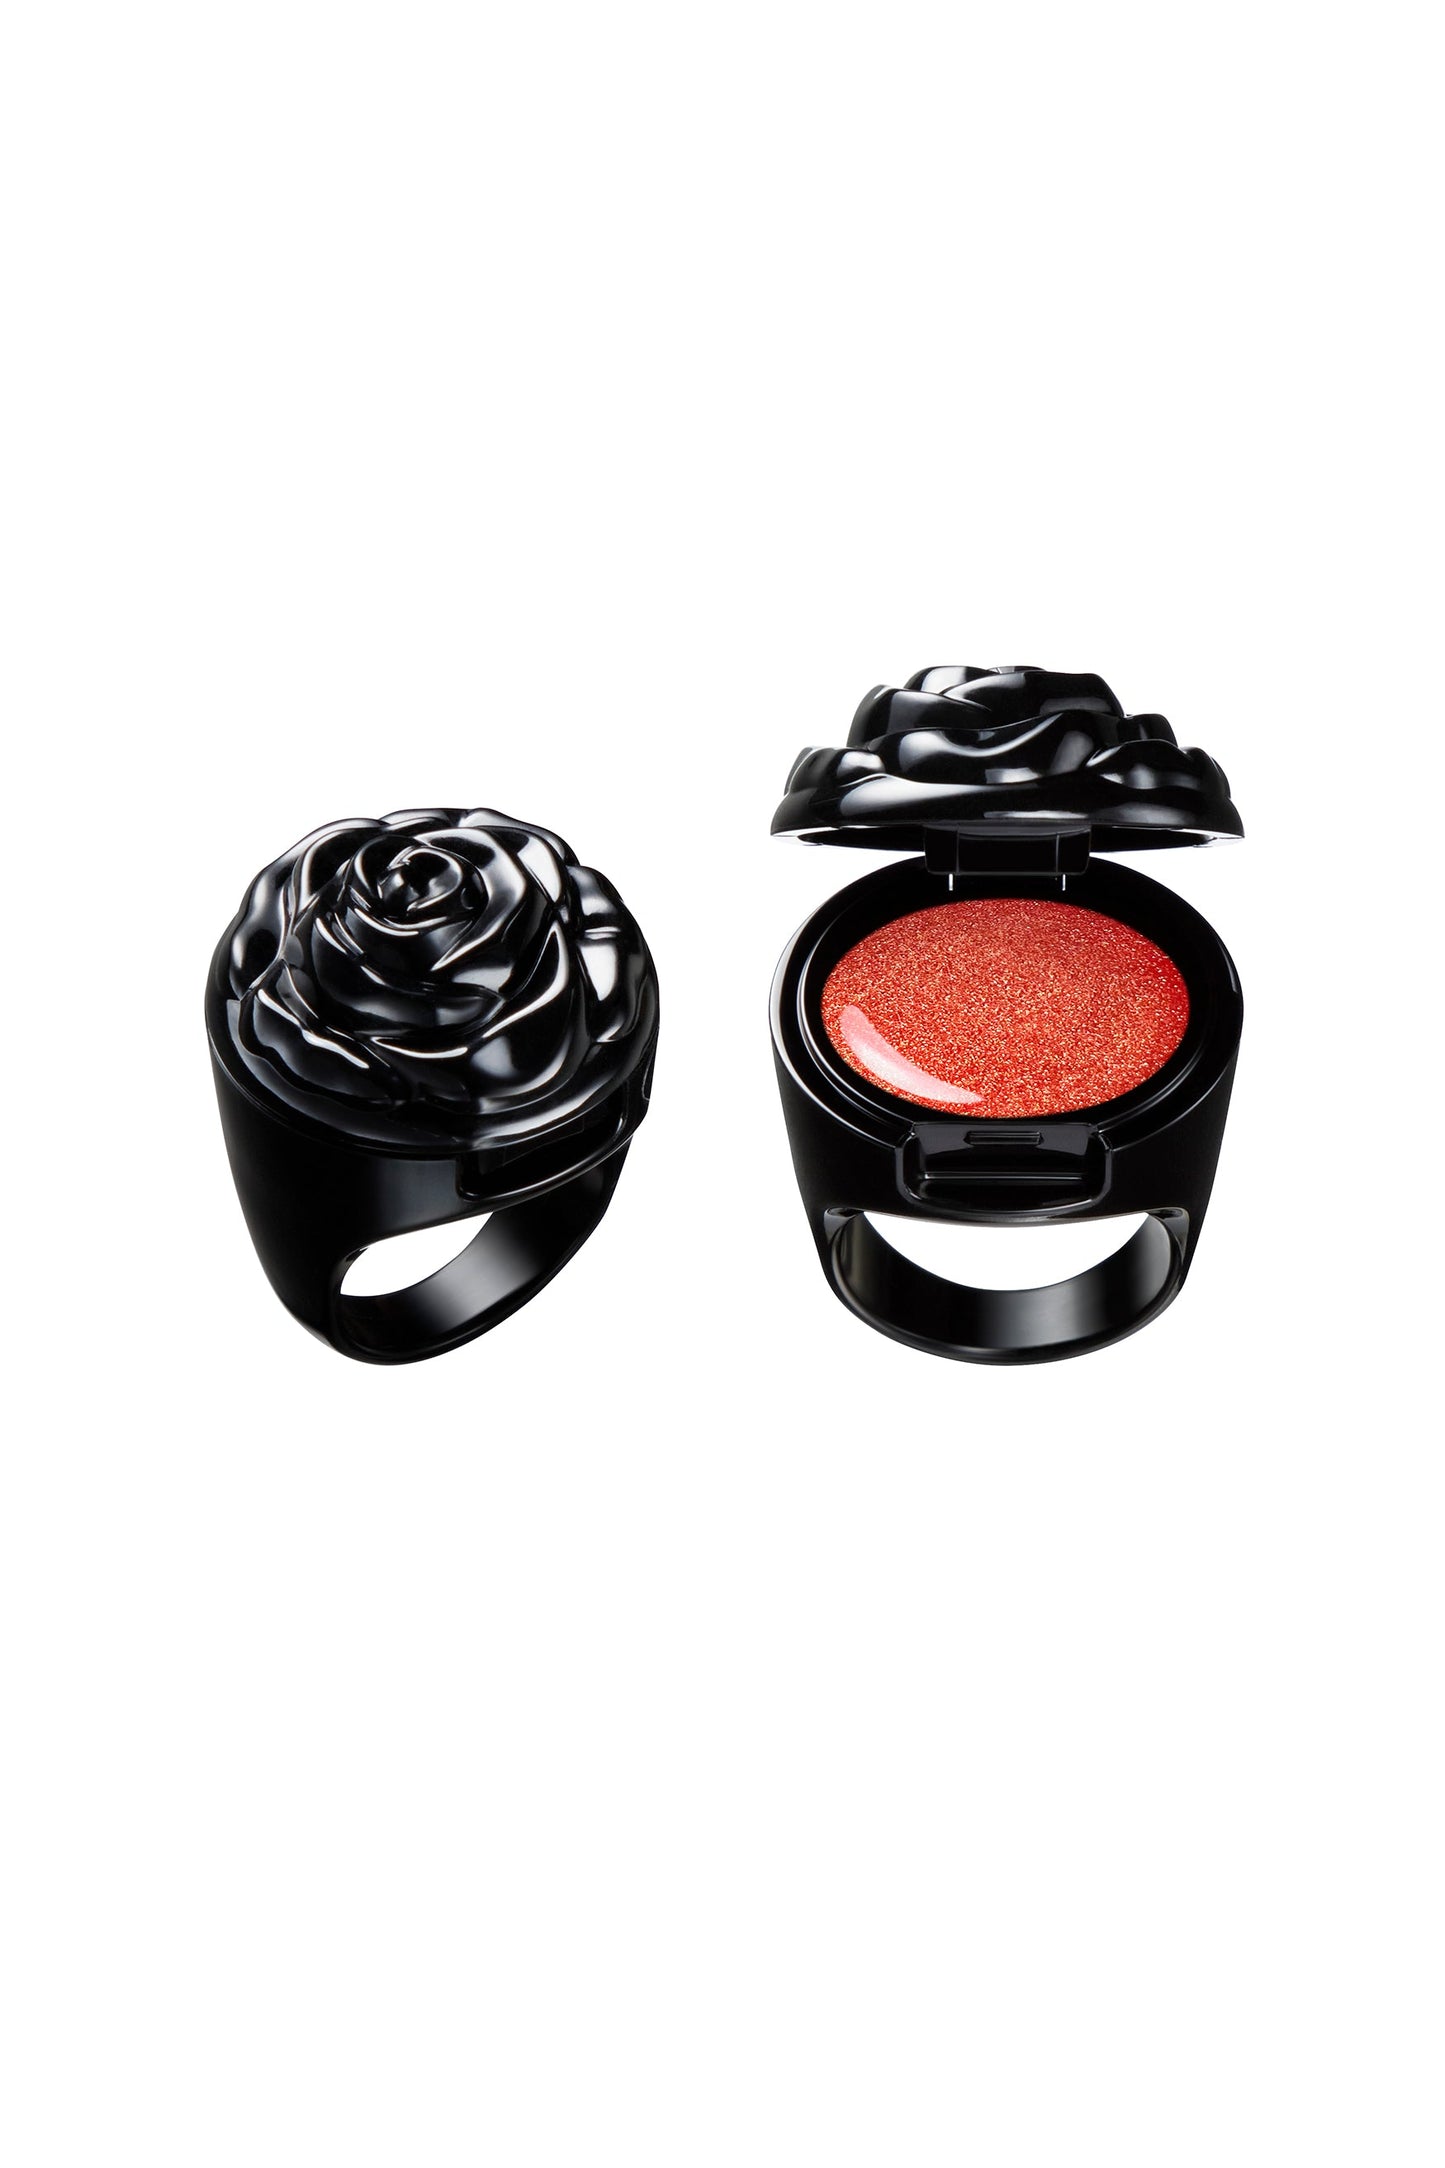 VIBRANT ORANGE in a black ring container, black rose as a cap, makeup inside